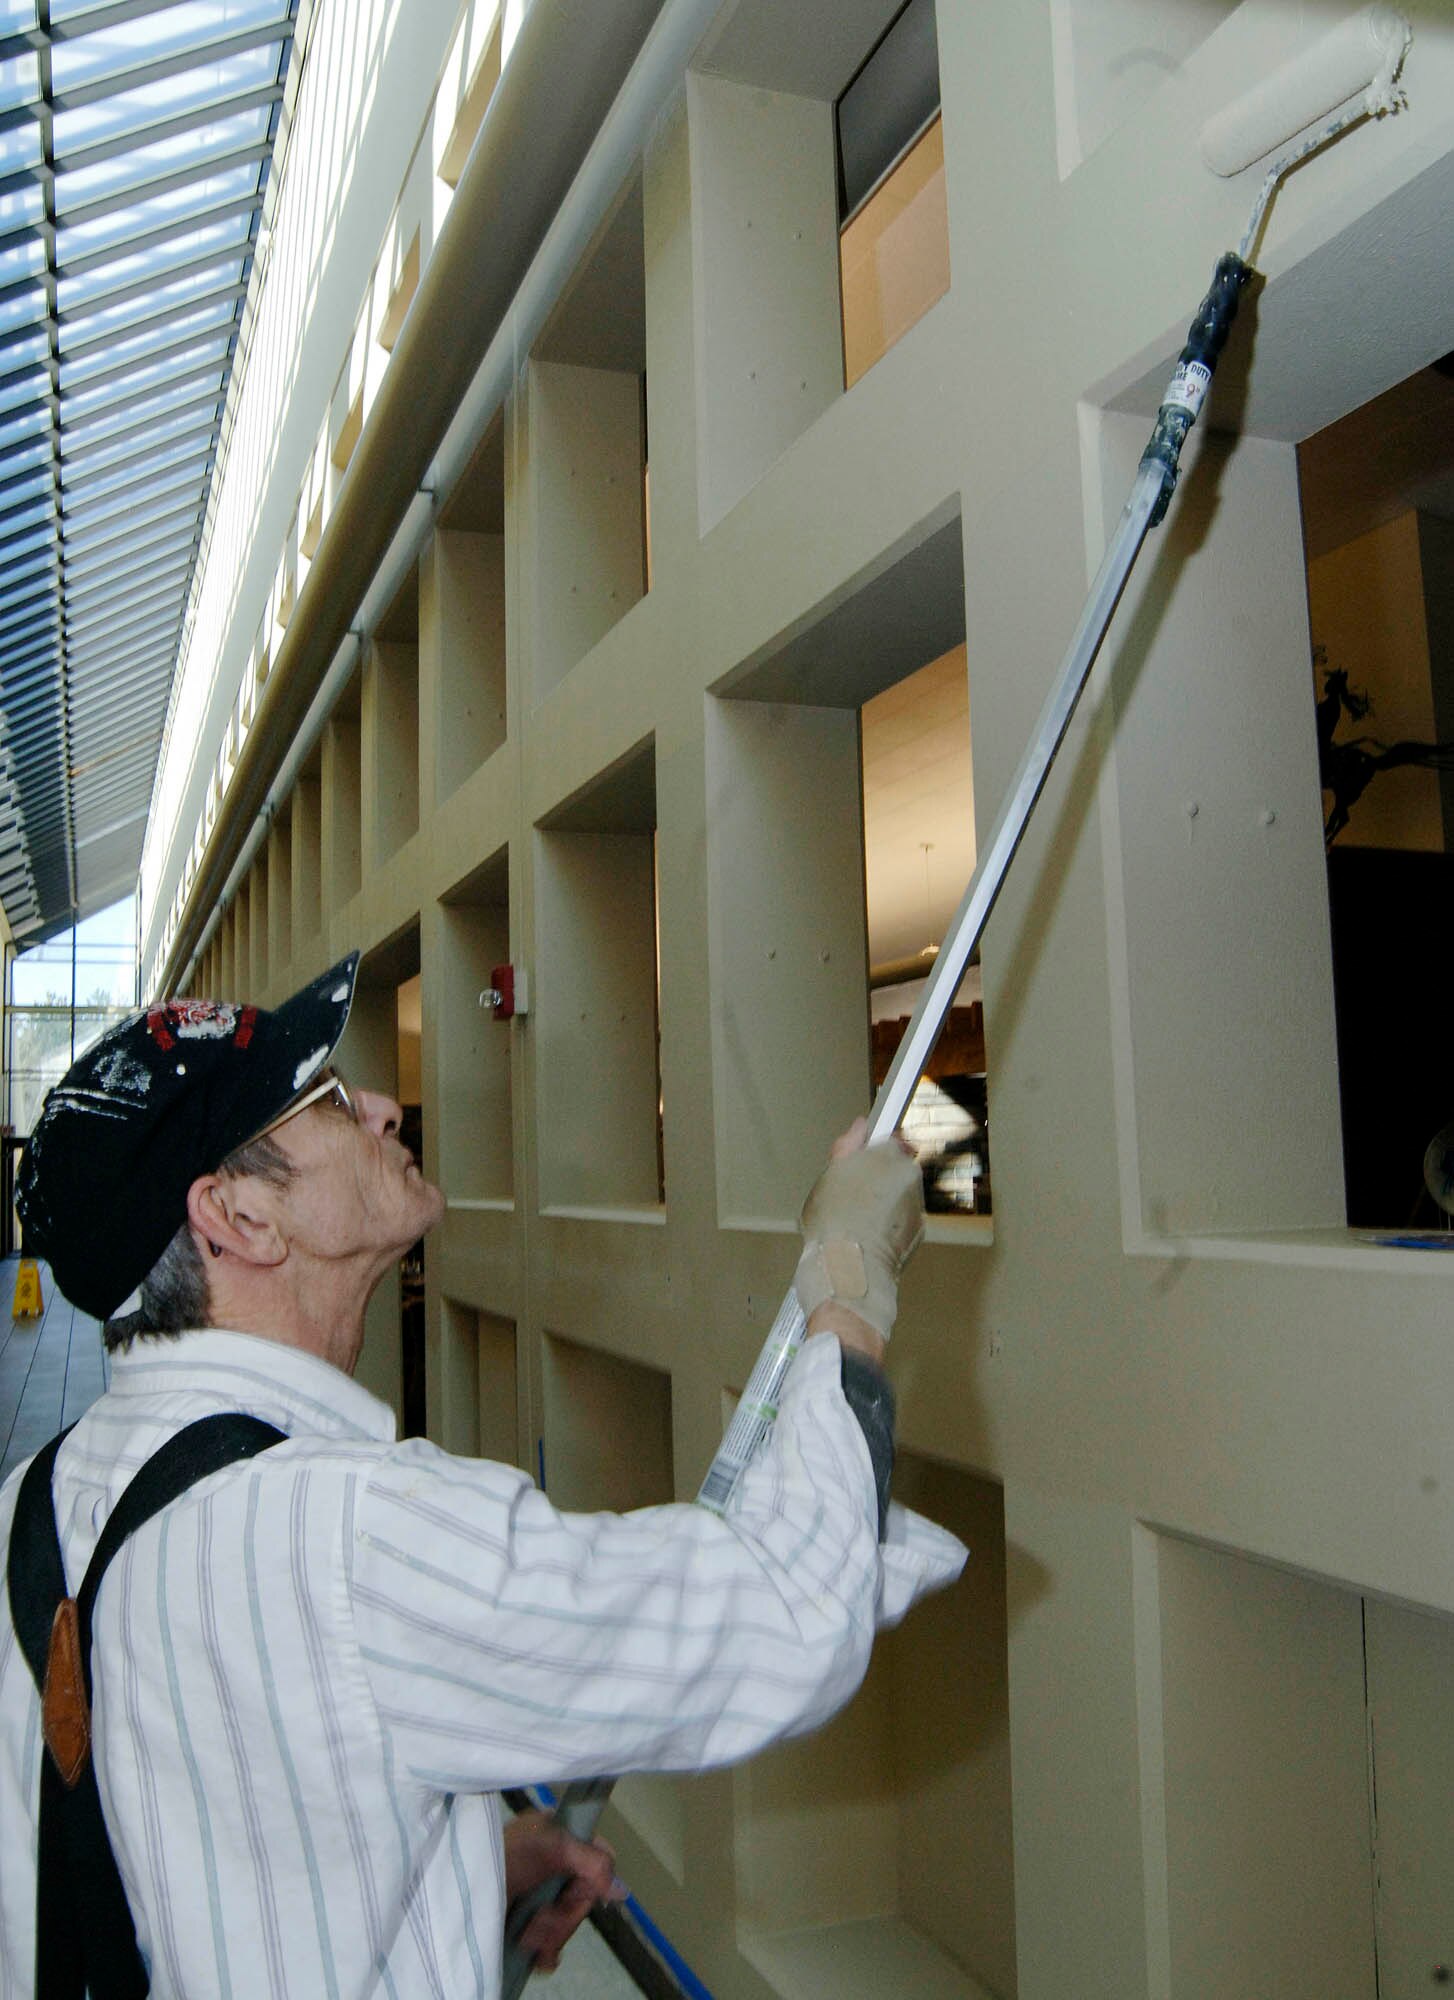 FAIRCHILD AIR FORCE BASE, Wash. – Charlie Crocket, 92nd Civil Engineer Squadrn painter, paints the interior of the Warrior Dining Facility March 18. Mr. Crocket is improving aesthetics while providing a better atmosphere for our military members. (U.S. Air Force photo/Staff Sgt. JT May III)